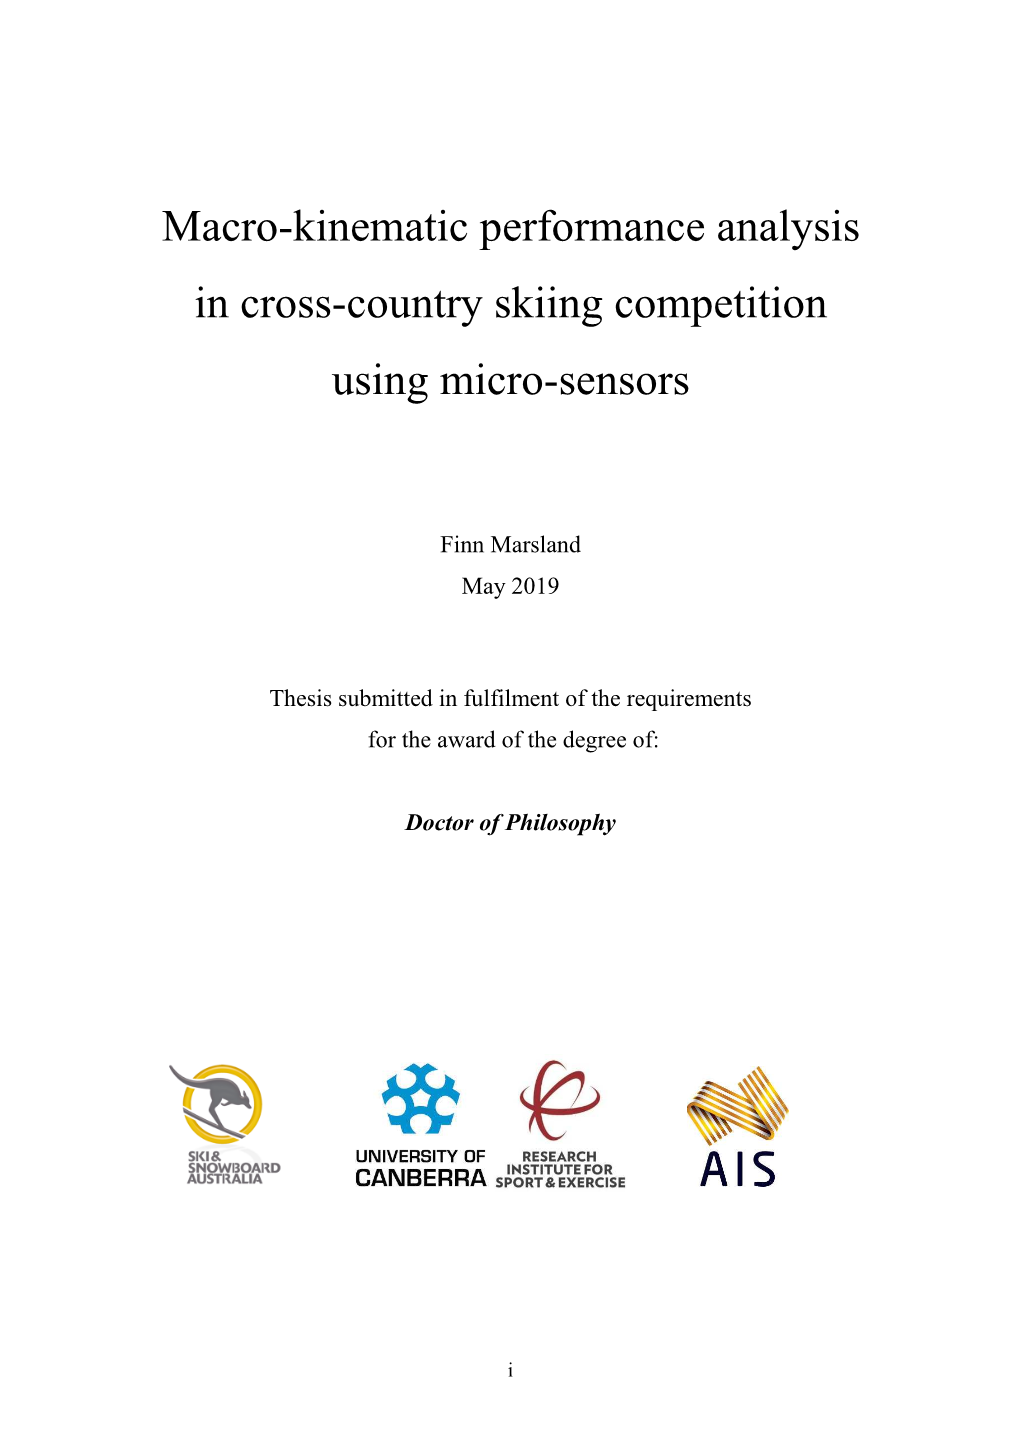 Macro-Kinematic Performance Analysis in Cross-Country Skiing Competition Using Micro-Sensors